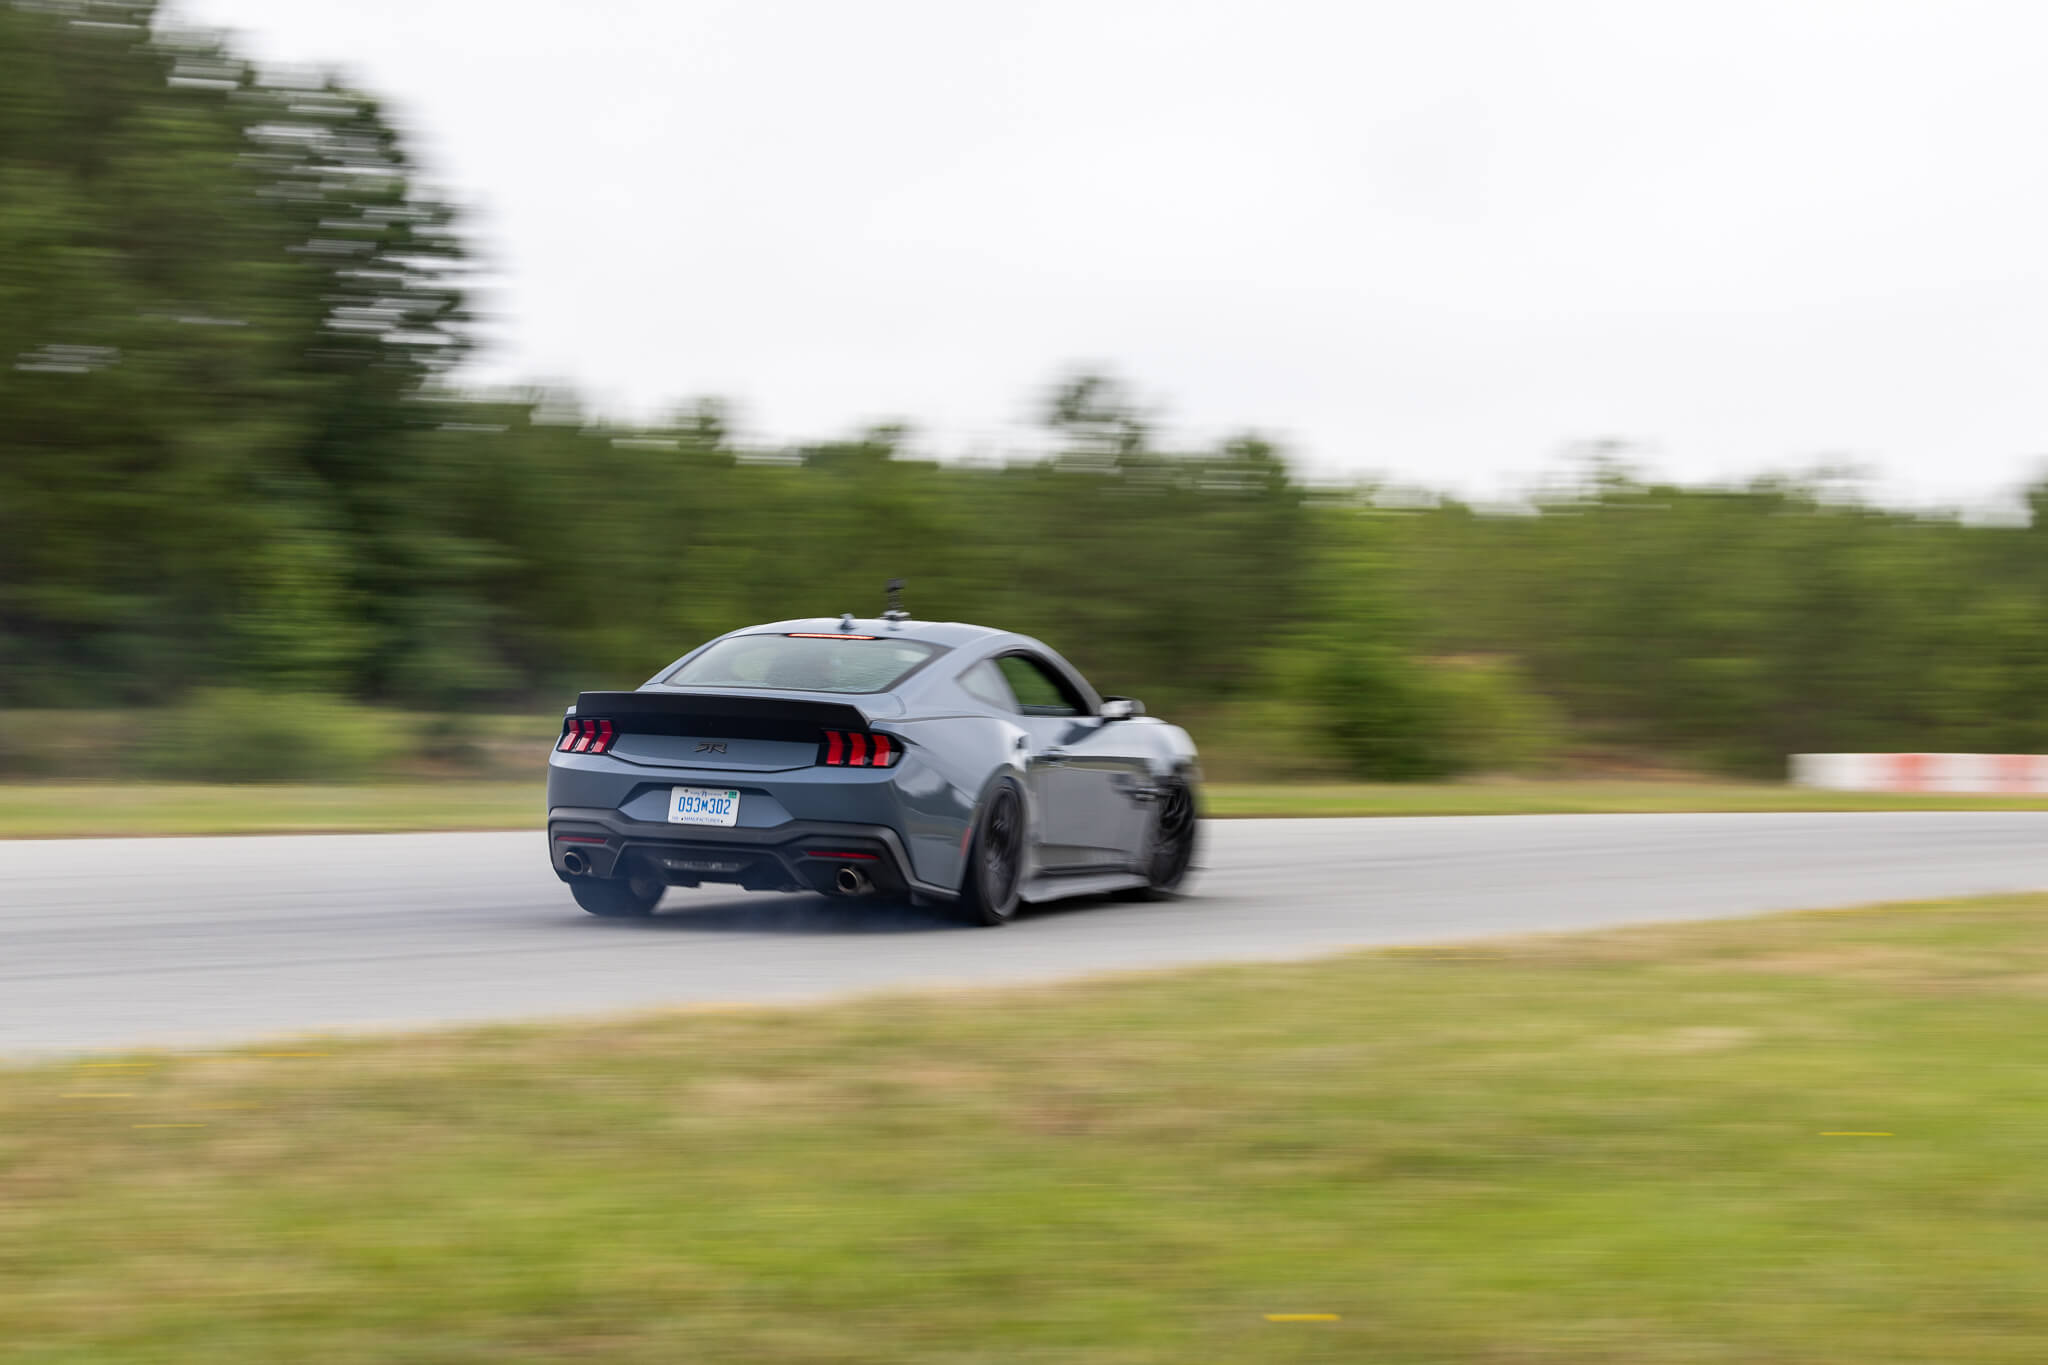 S650 Mustang RTR Vehicles Suspension Validation Testing on the 7th Generation Mustang JCOL4899